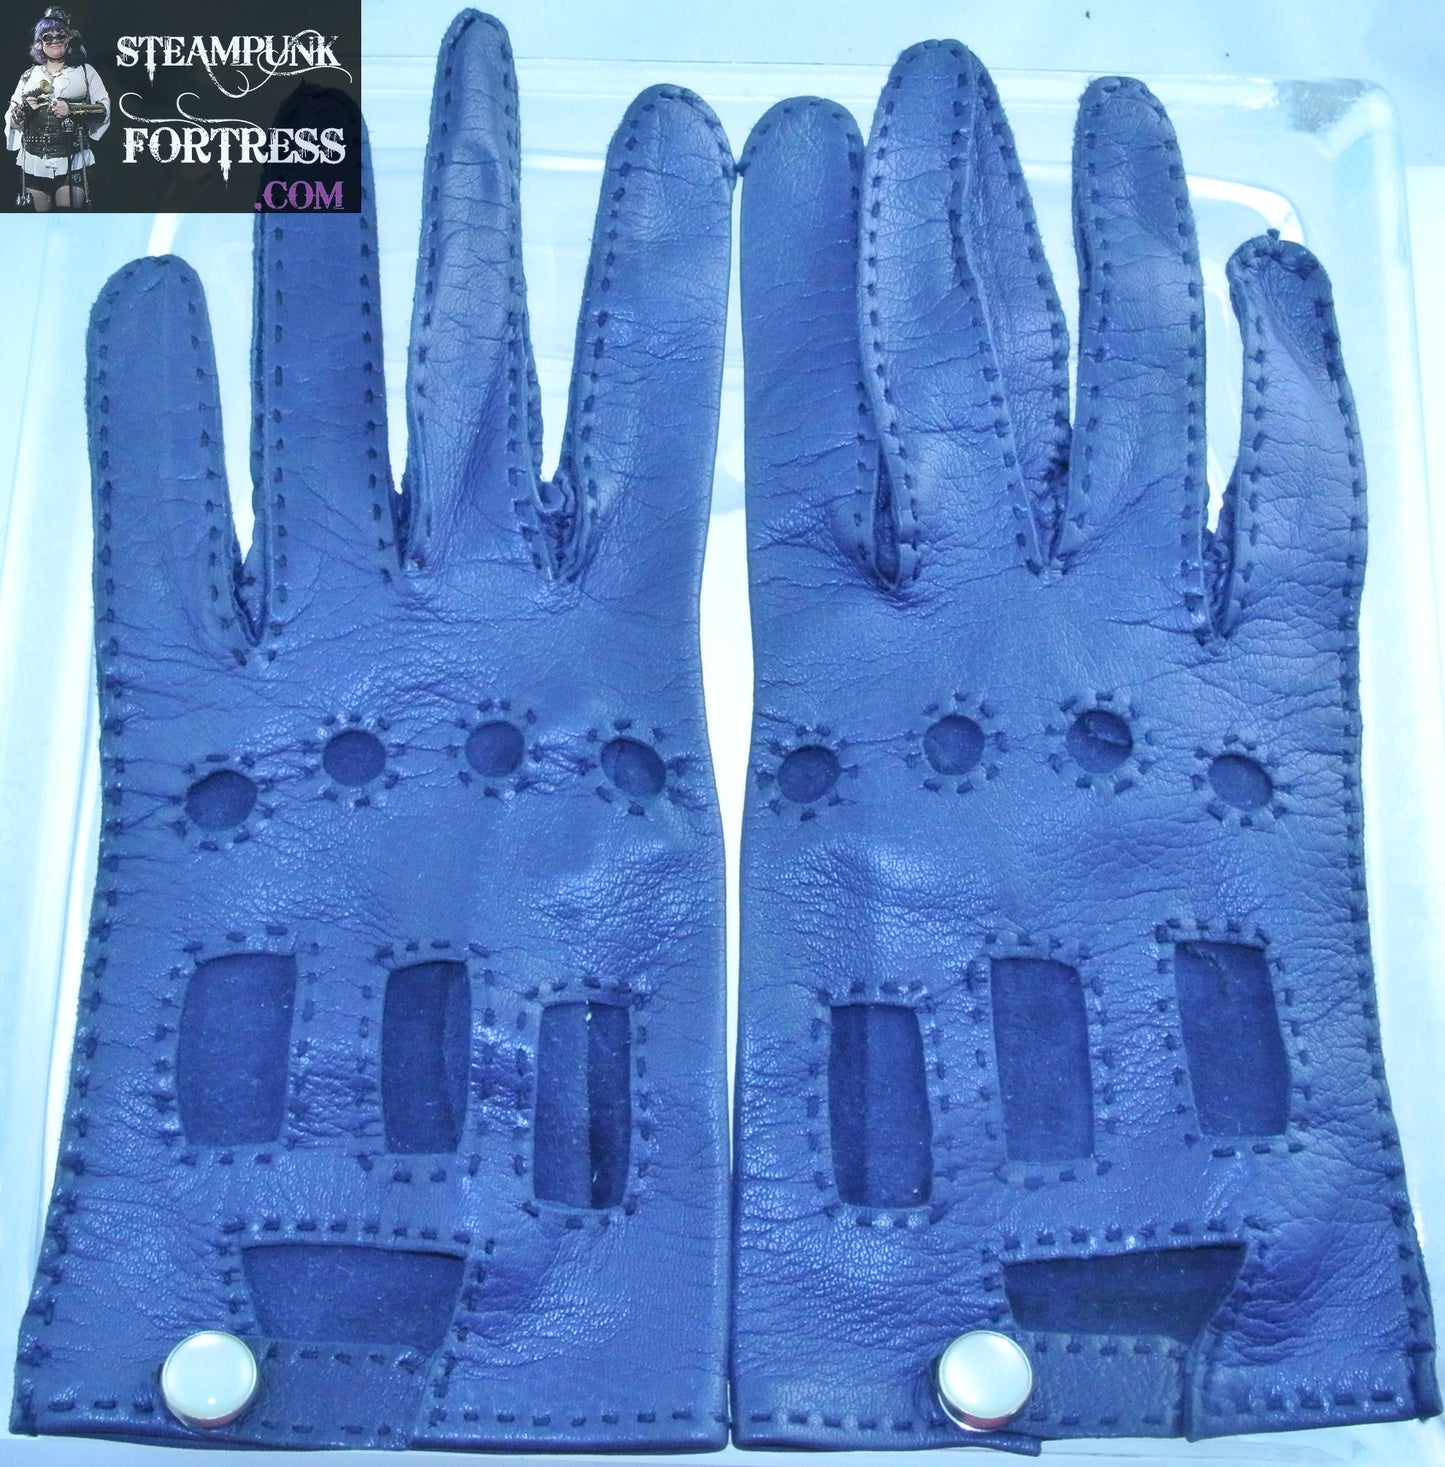 VINTAGE DARK NAVY BLUE GENUINE LEATHER CUTOUTS DRIVING GLOVES SMALL MEDIUM - MASS PRODUCED